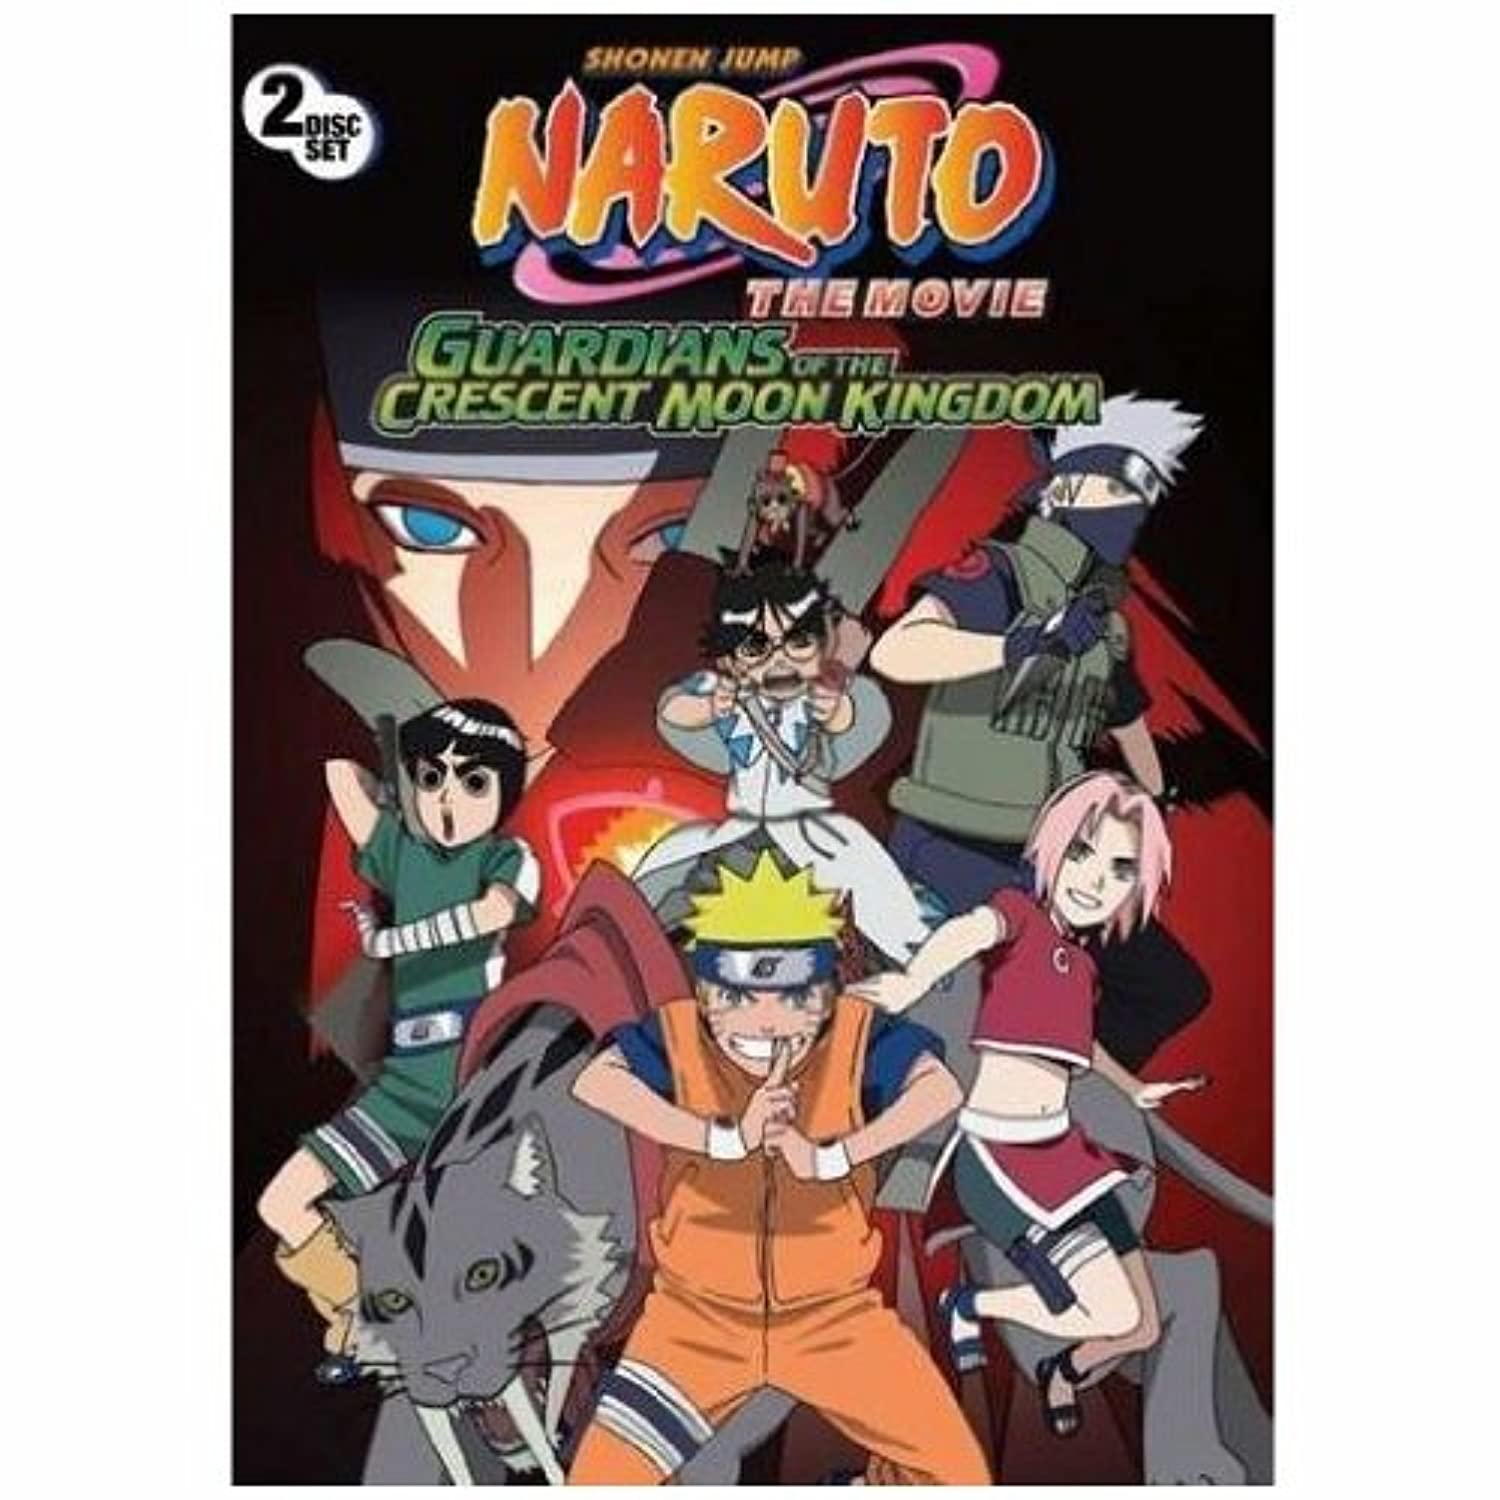 Naruto: The Movie - Guardians of the Crescent Moon Kingdom